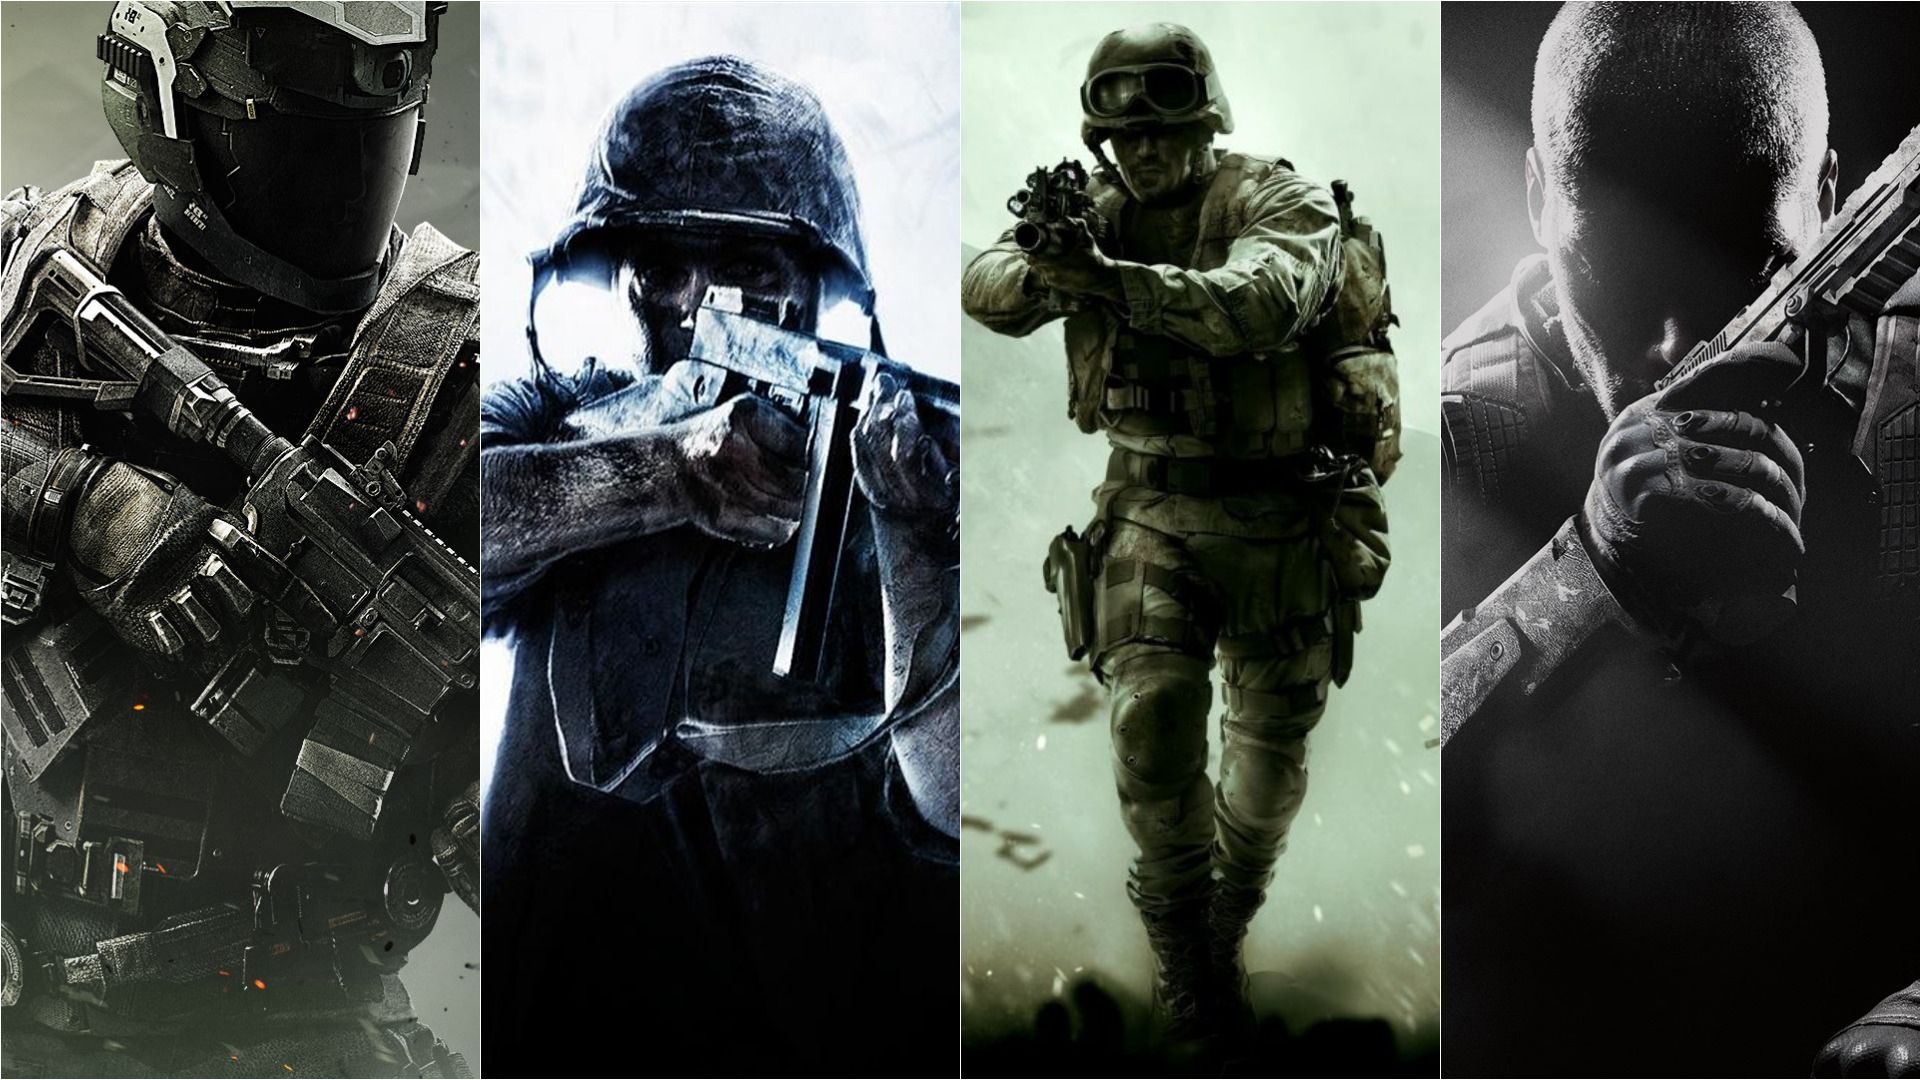 Every 'Call of Duty' game ranked from worst to best